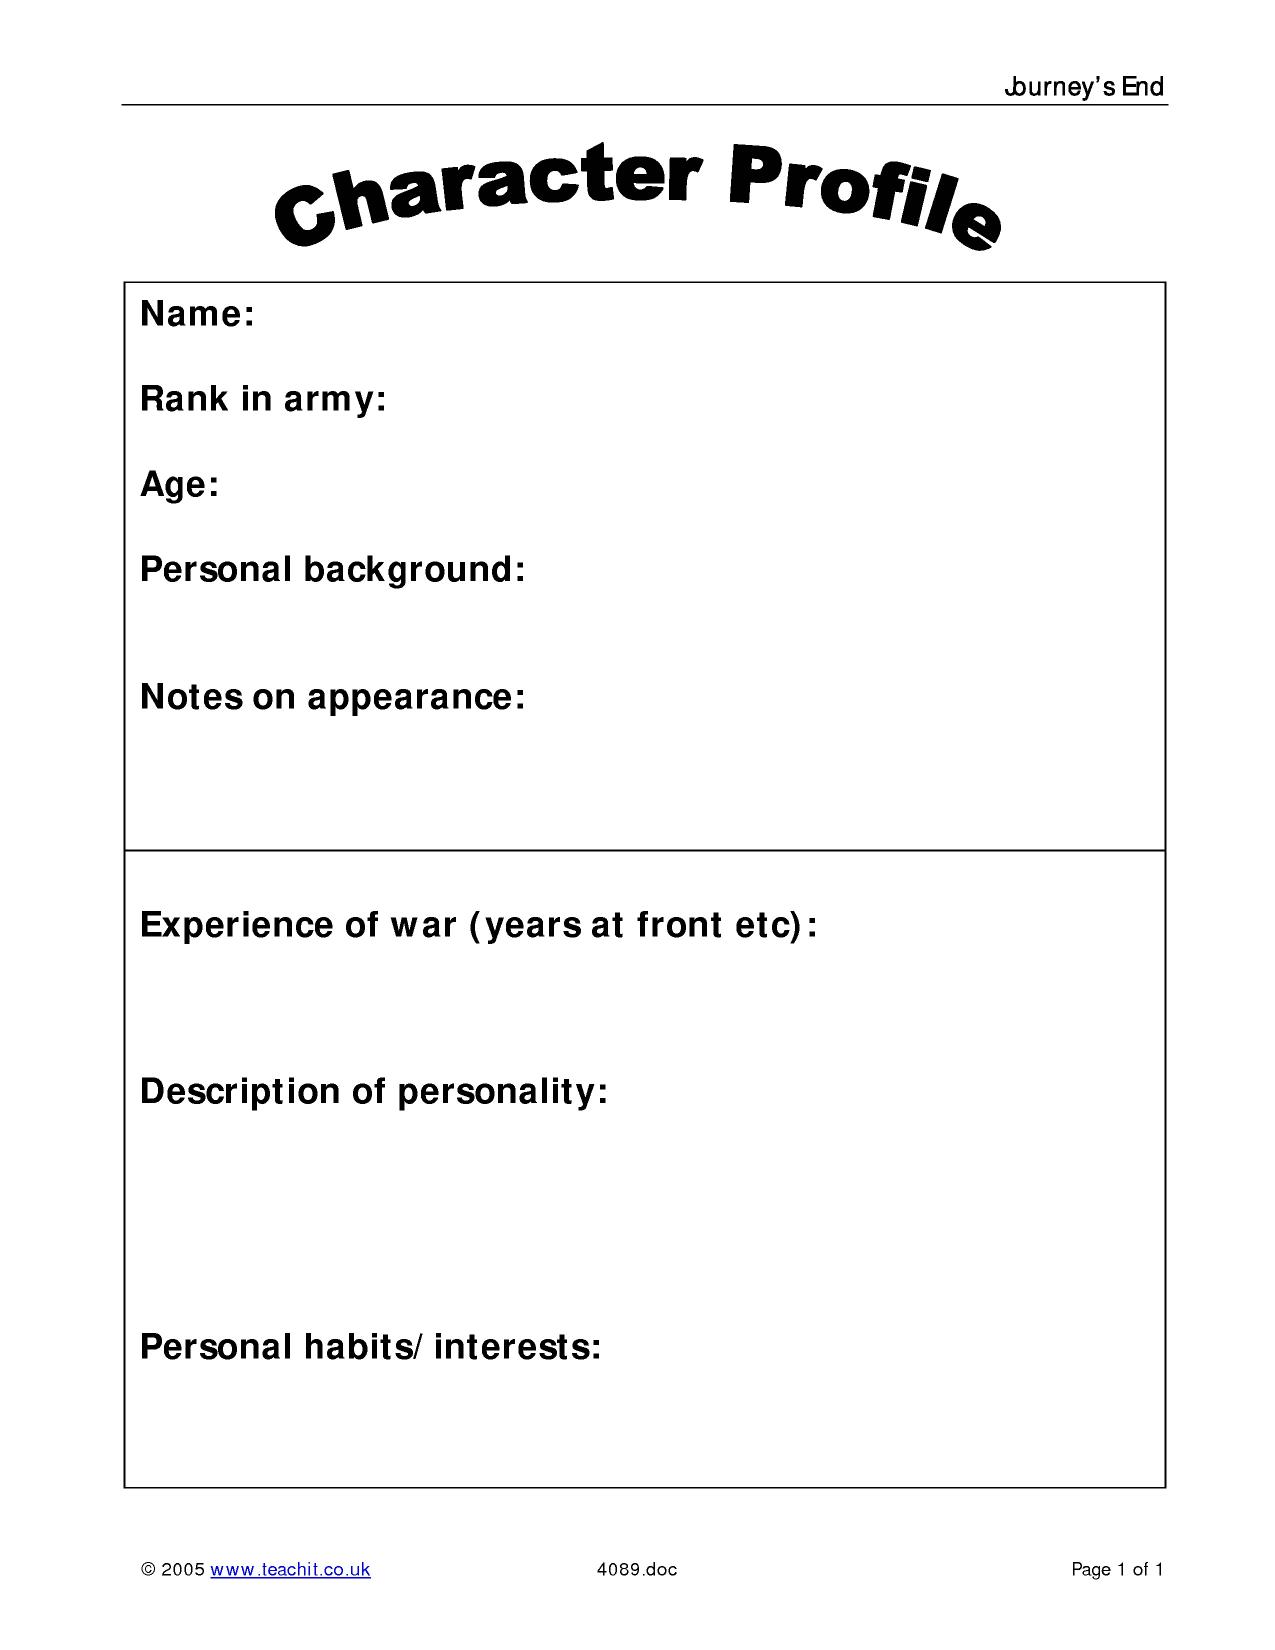 How to Create a Character Profile